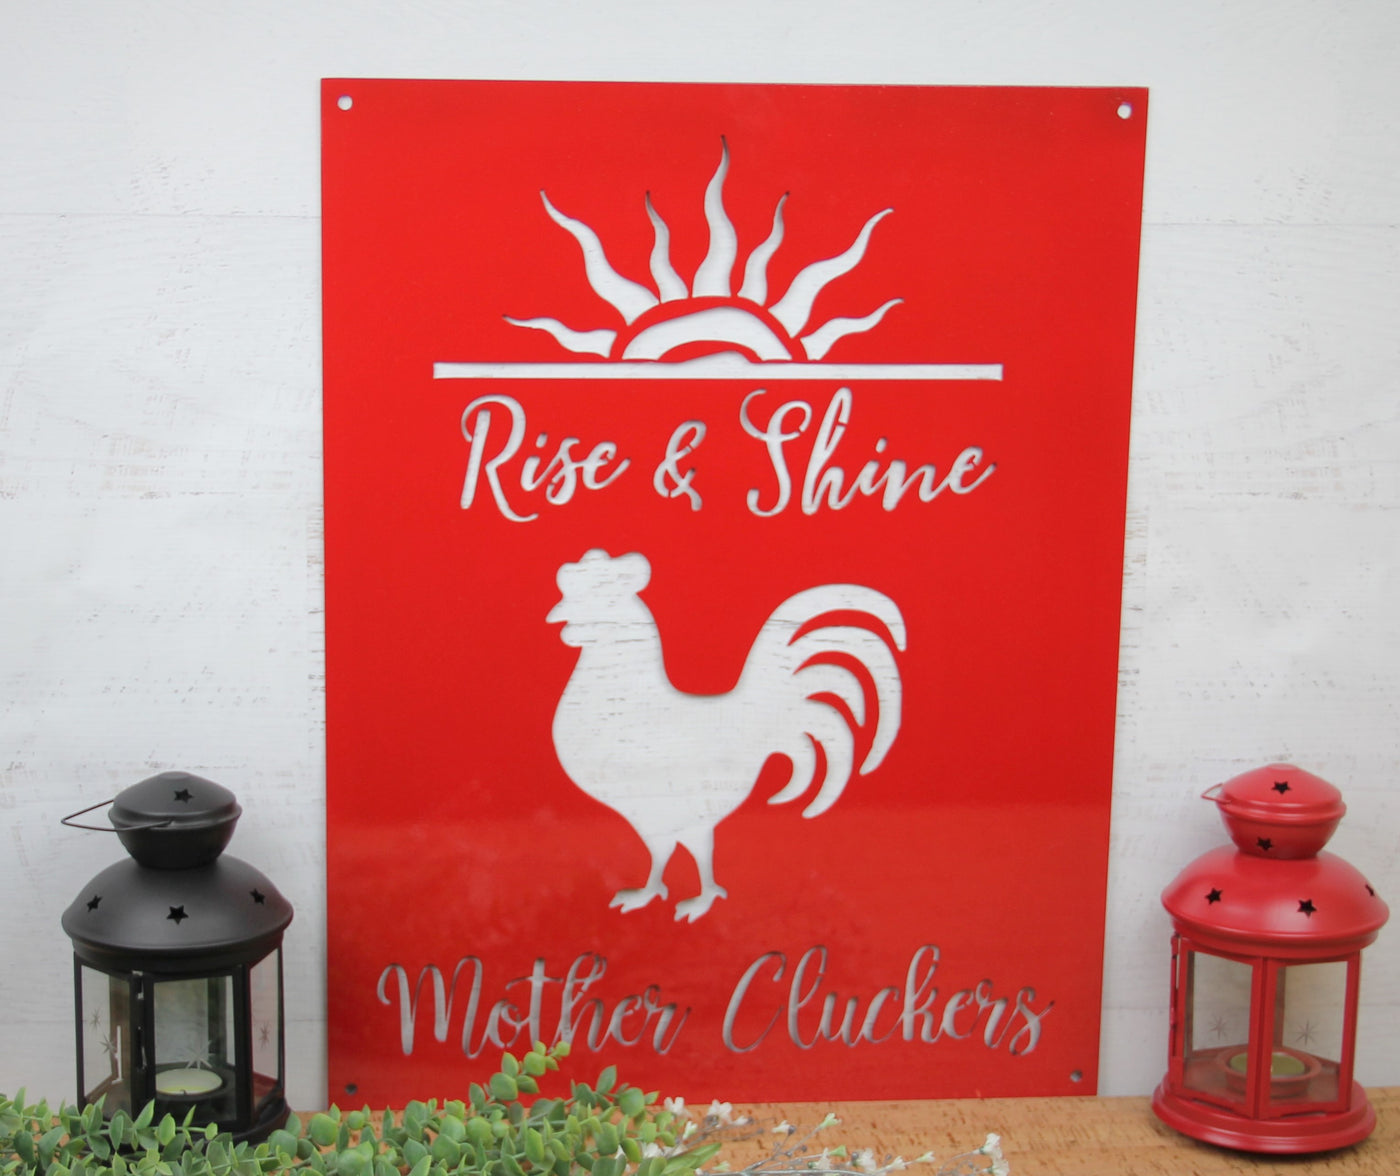 Rise and Shine Mother Cluckers, Metal Word Sign - Madison Iron and Wood - Wall Art - metal outdoor decor - Steel deocrations - american made products - veteran owned business products - fencing decorations - fencing supplies - custom wall decorations - personalized wall signs - steel - decorative post caps - steel post caps - metal post caps - brackets - structural brackets - home improvement - easter - easter decorations - easter gift - easter yard decor